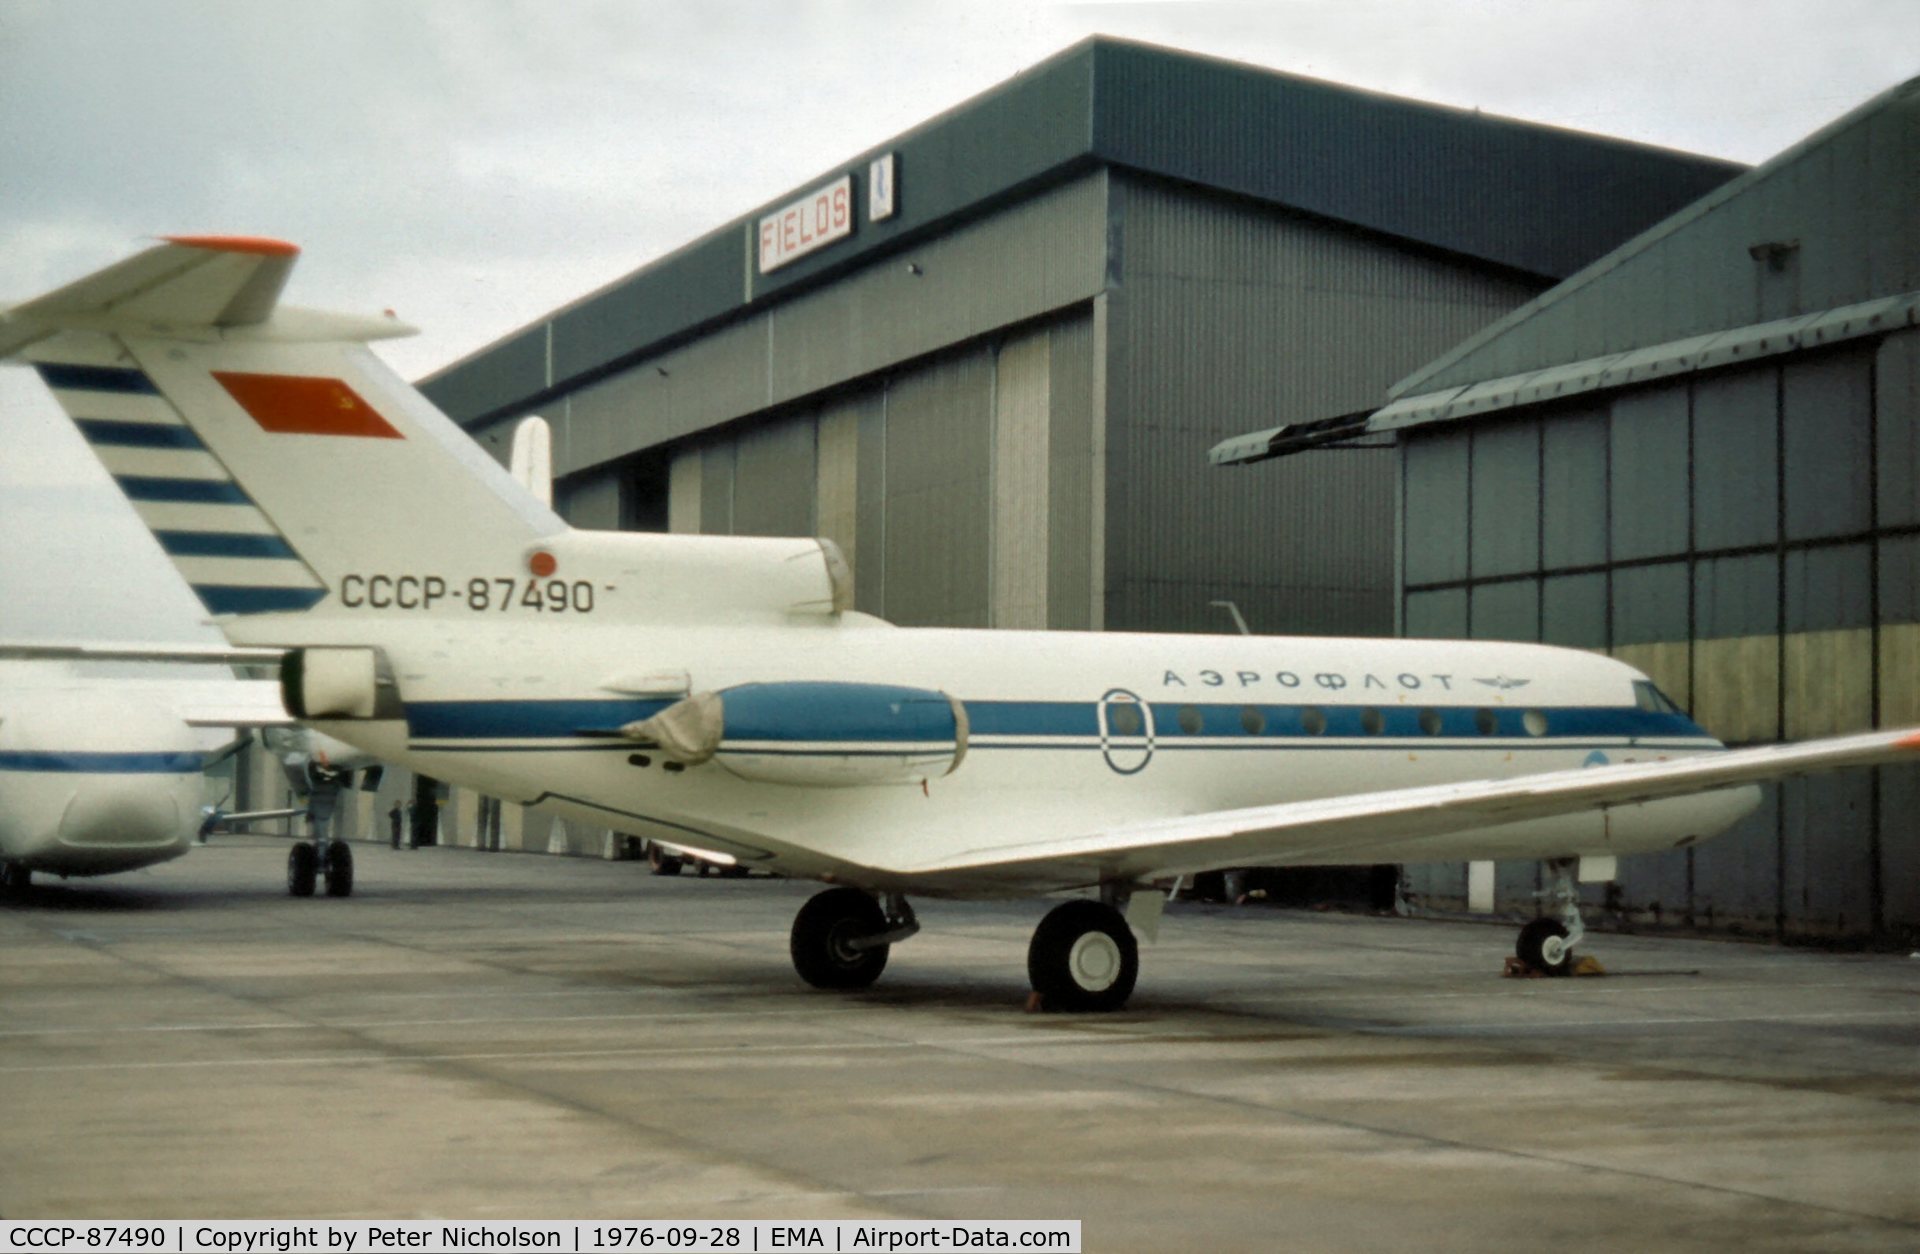 CCCP-87490, 1971 Yakovlev Yak-40K C/N 9110117, Now preserved at Moscow, this Yak-40 Codling of Aeroflot was present at East Midlands Airport in September 1976.